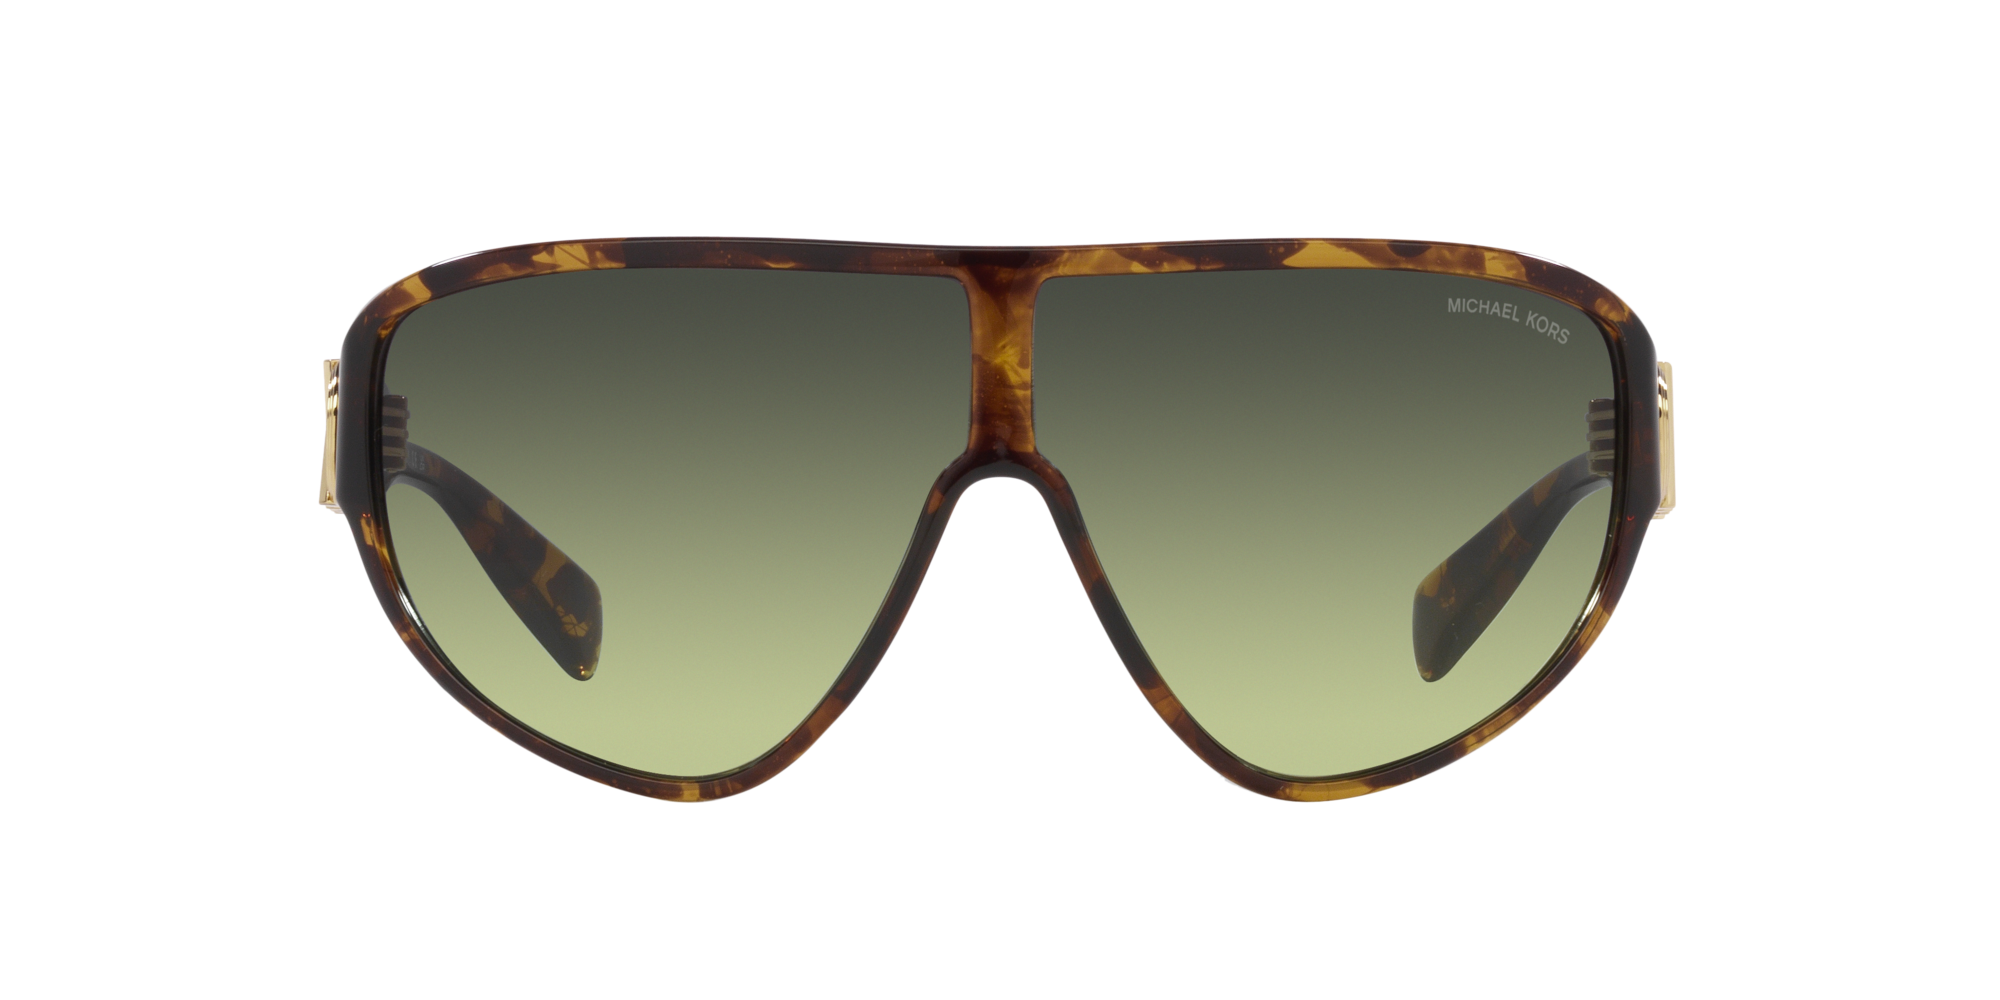 [products.image.front] Michael Kors EMPIRE SHIELD 0MK2194 30060N Sonnenbrille